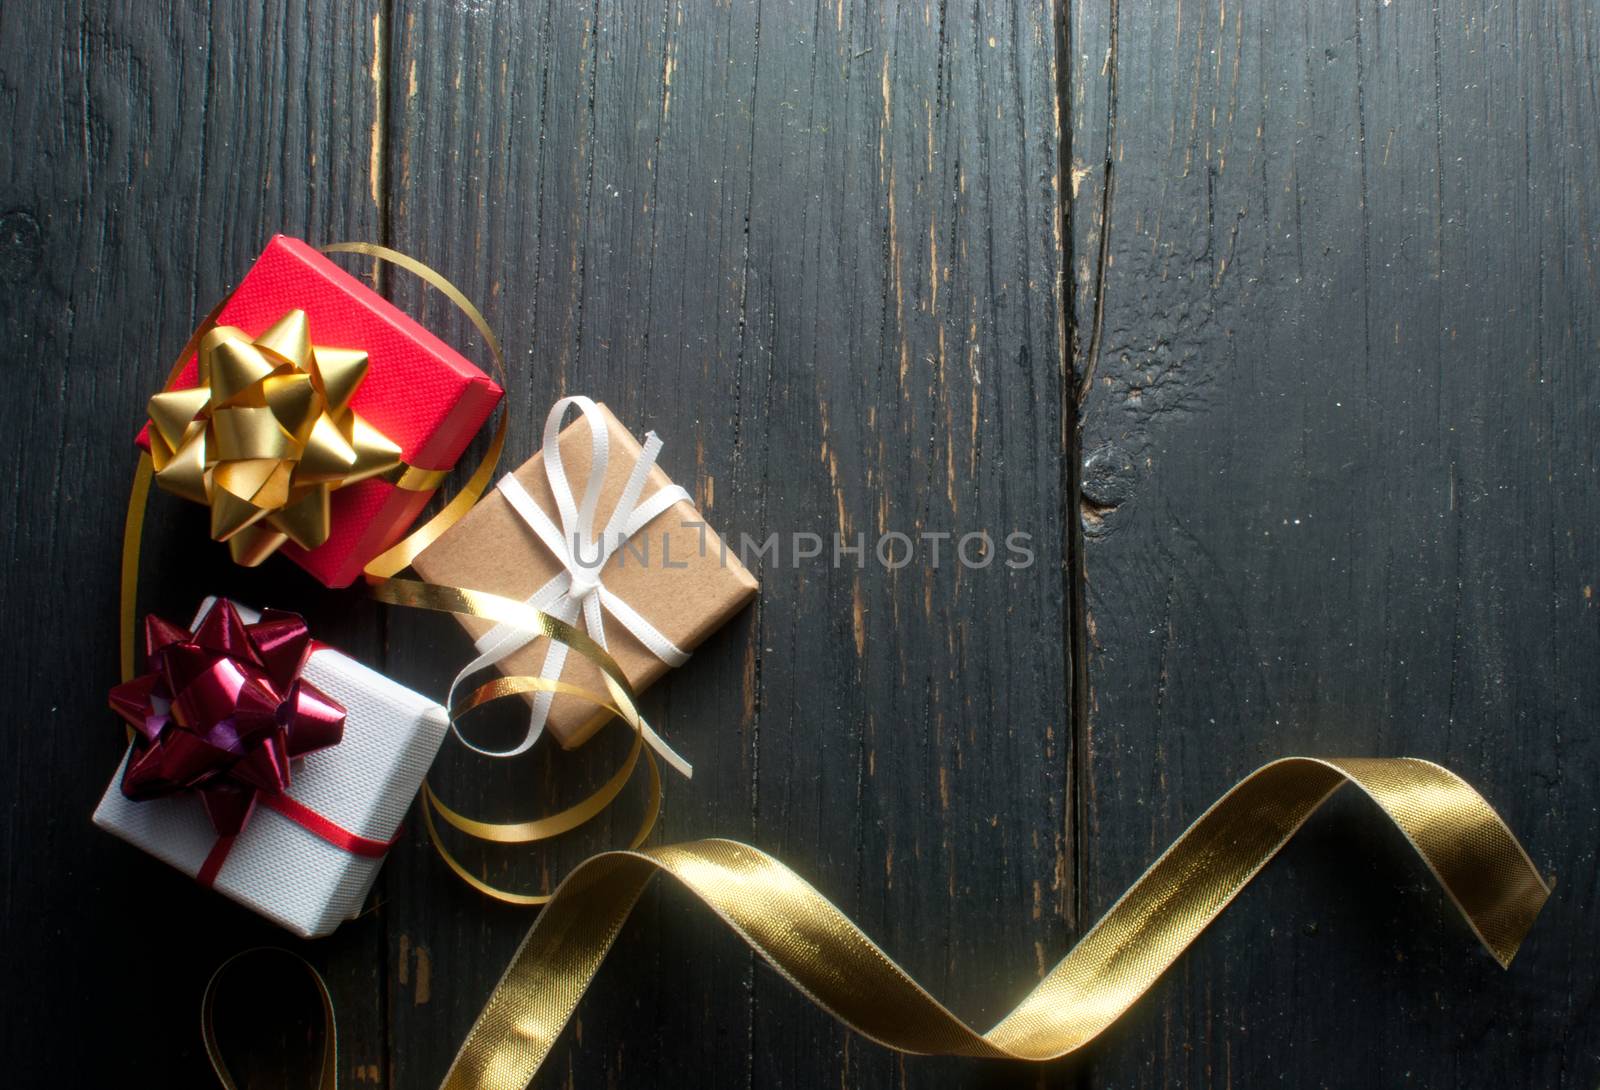 Christmas presents wrapped with ribbon over a wooden background